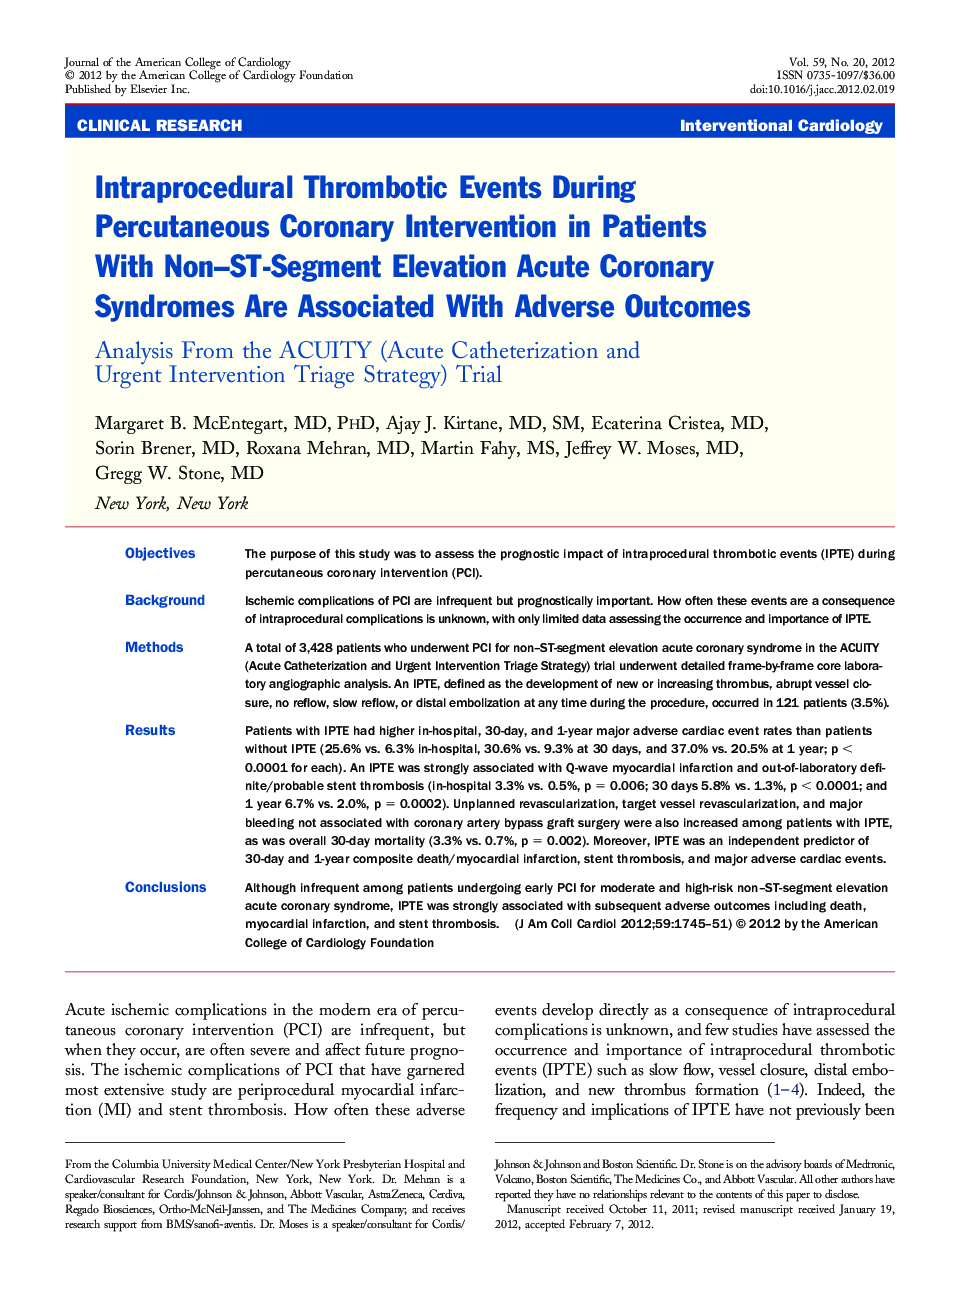 Intraprocedural Thrombotic Events During Percutaneous Coronary Intervention in Patients With Non–ST-Segment Elevation Acute Coronary Syndromes Are Associated With Adverse Outcomes : Analysis From the ACUITY (Acute Catheterization and Urgent Intervention T